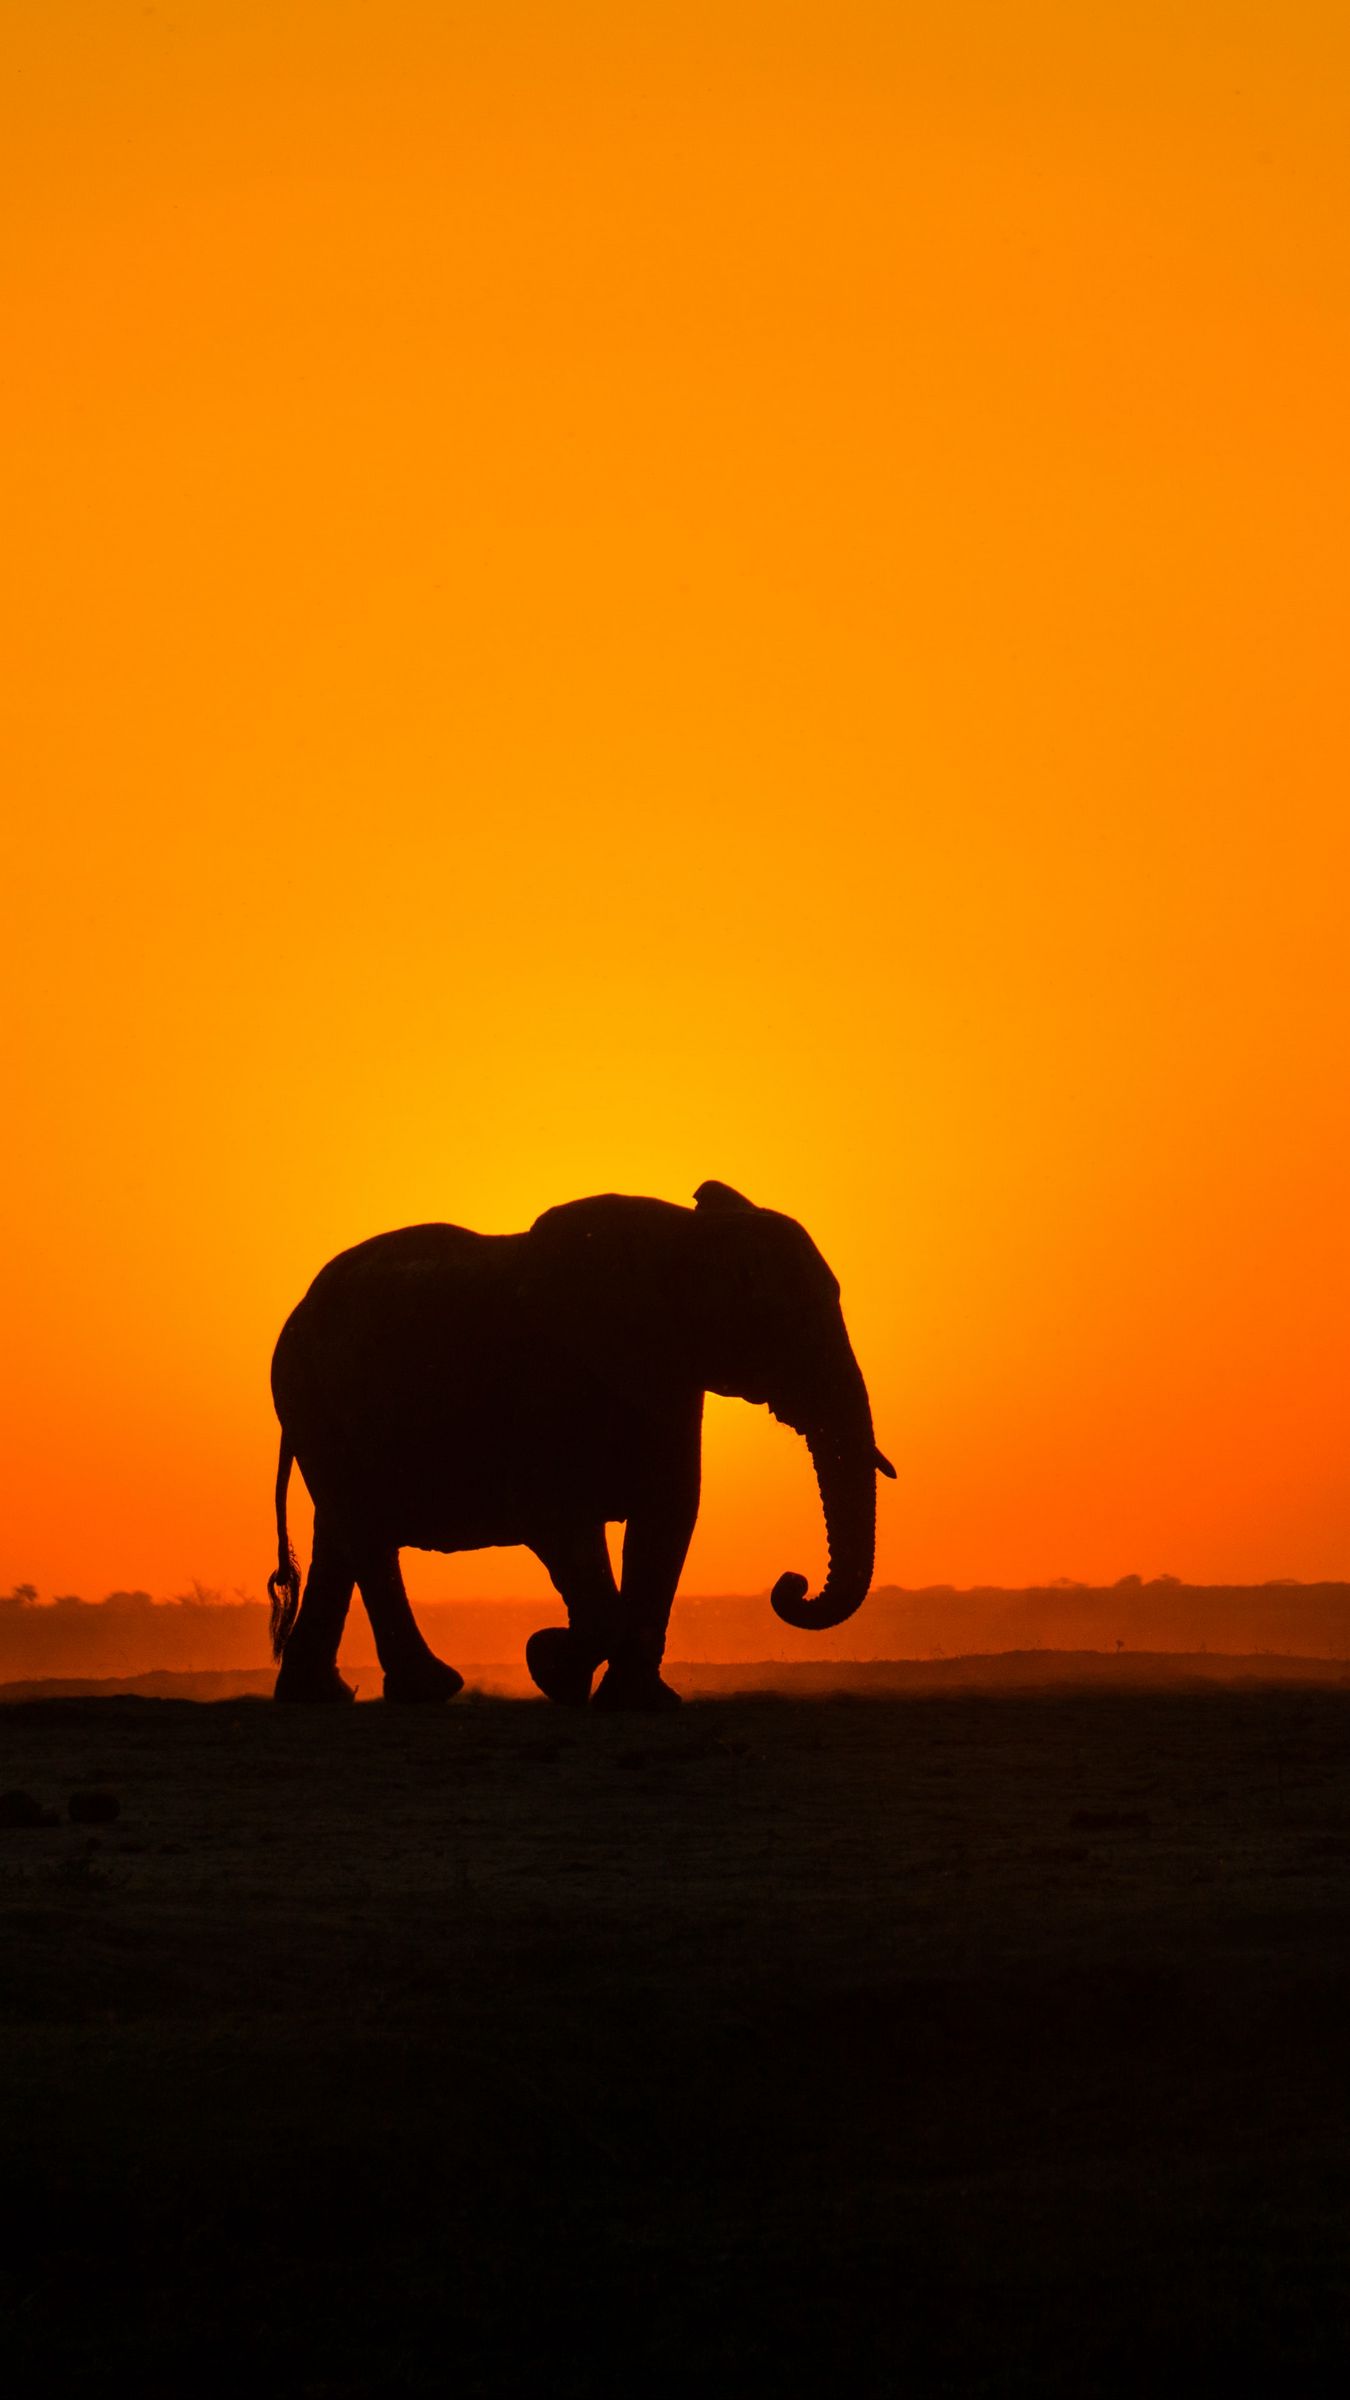 Download wallpaper 1350x2400 elephant, sunset, silhouette, africa iphone 8+/7+/6s+/for parallax HD background